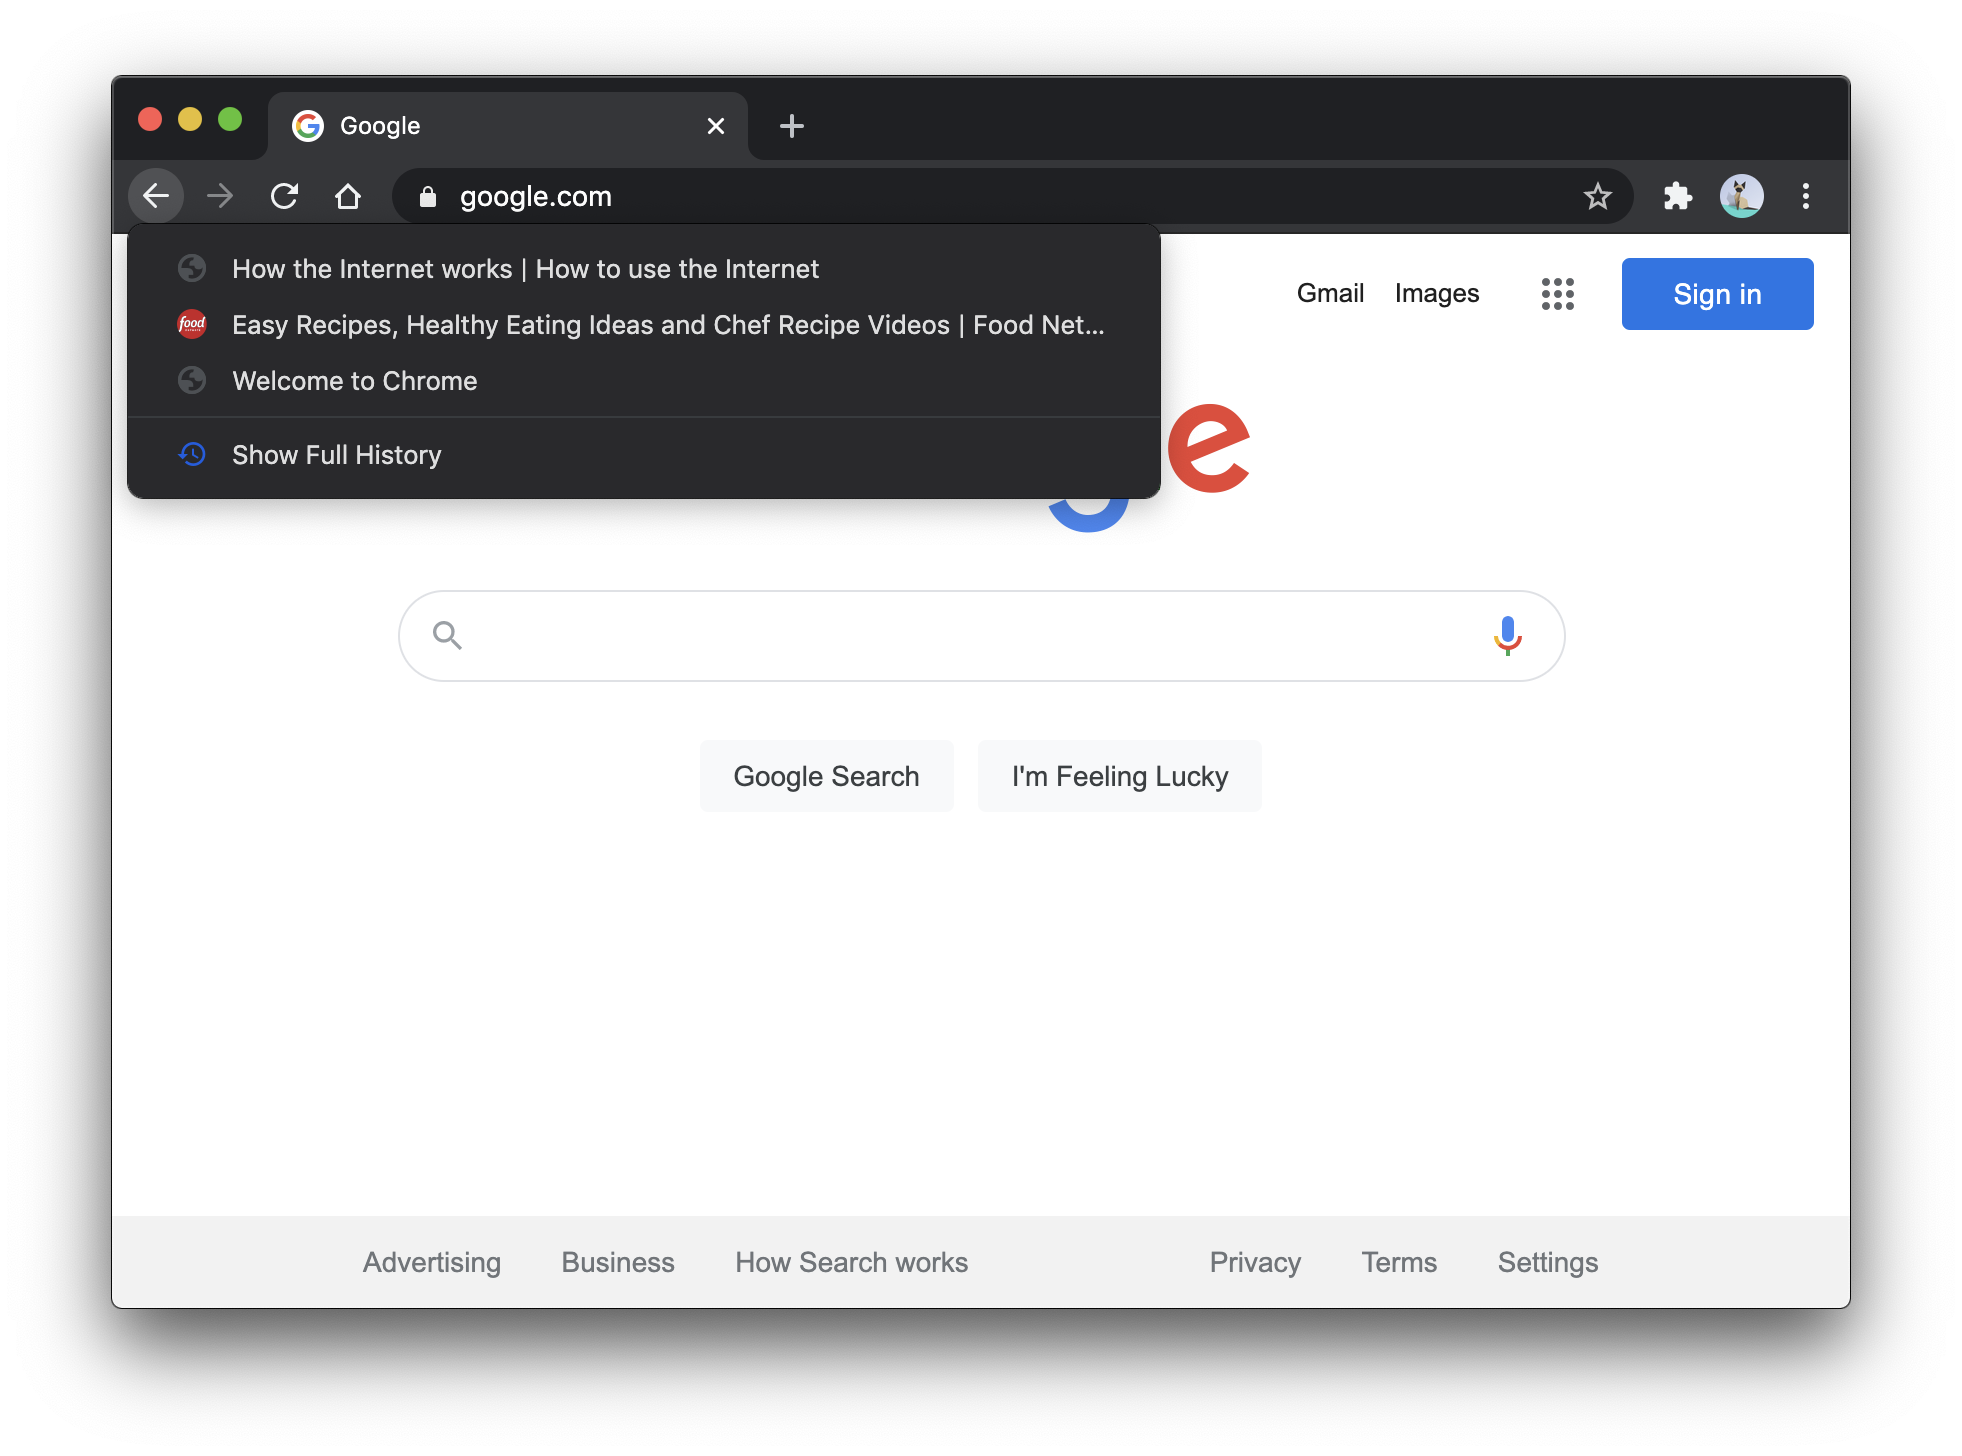 Holding the back button in Chrome